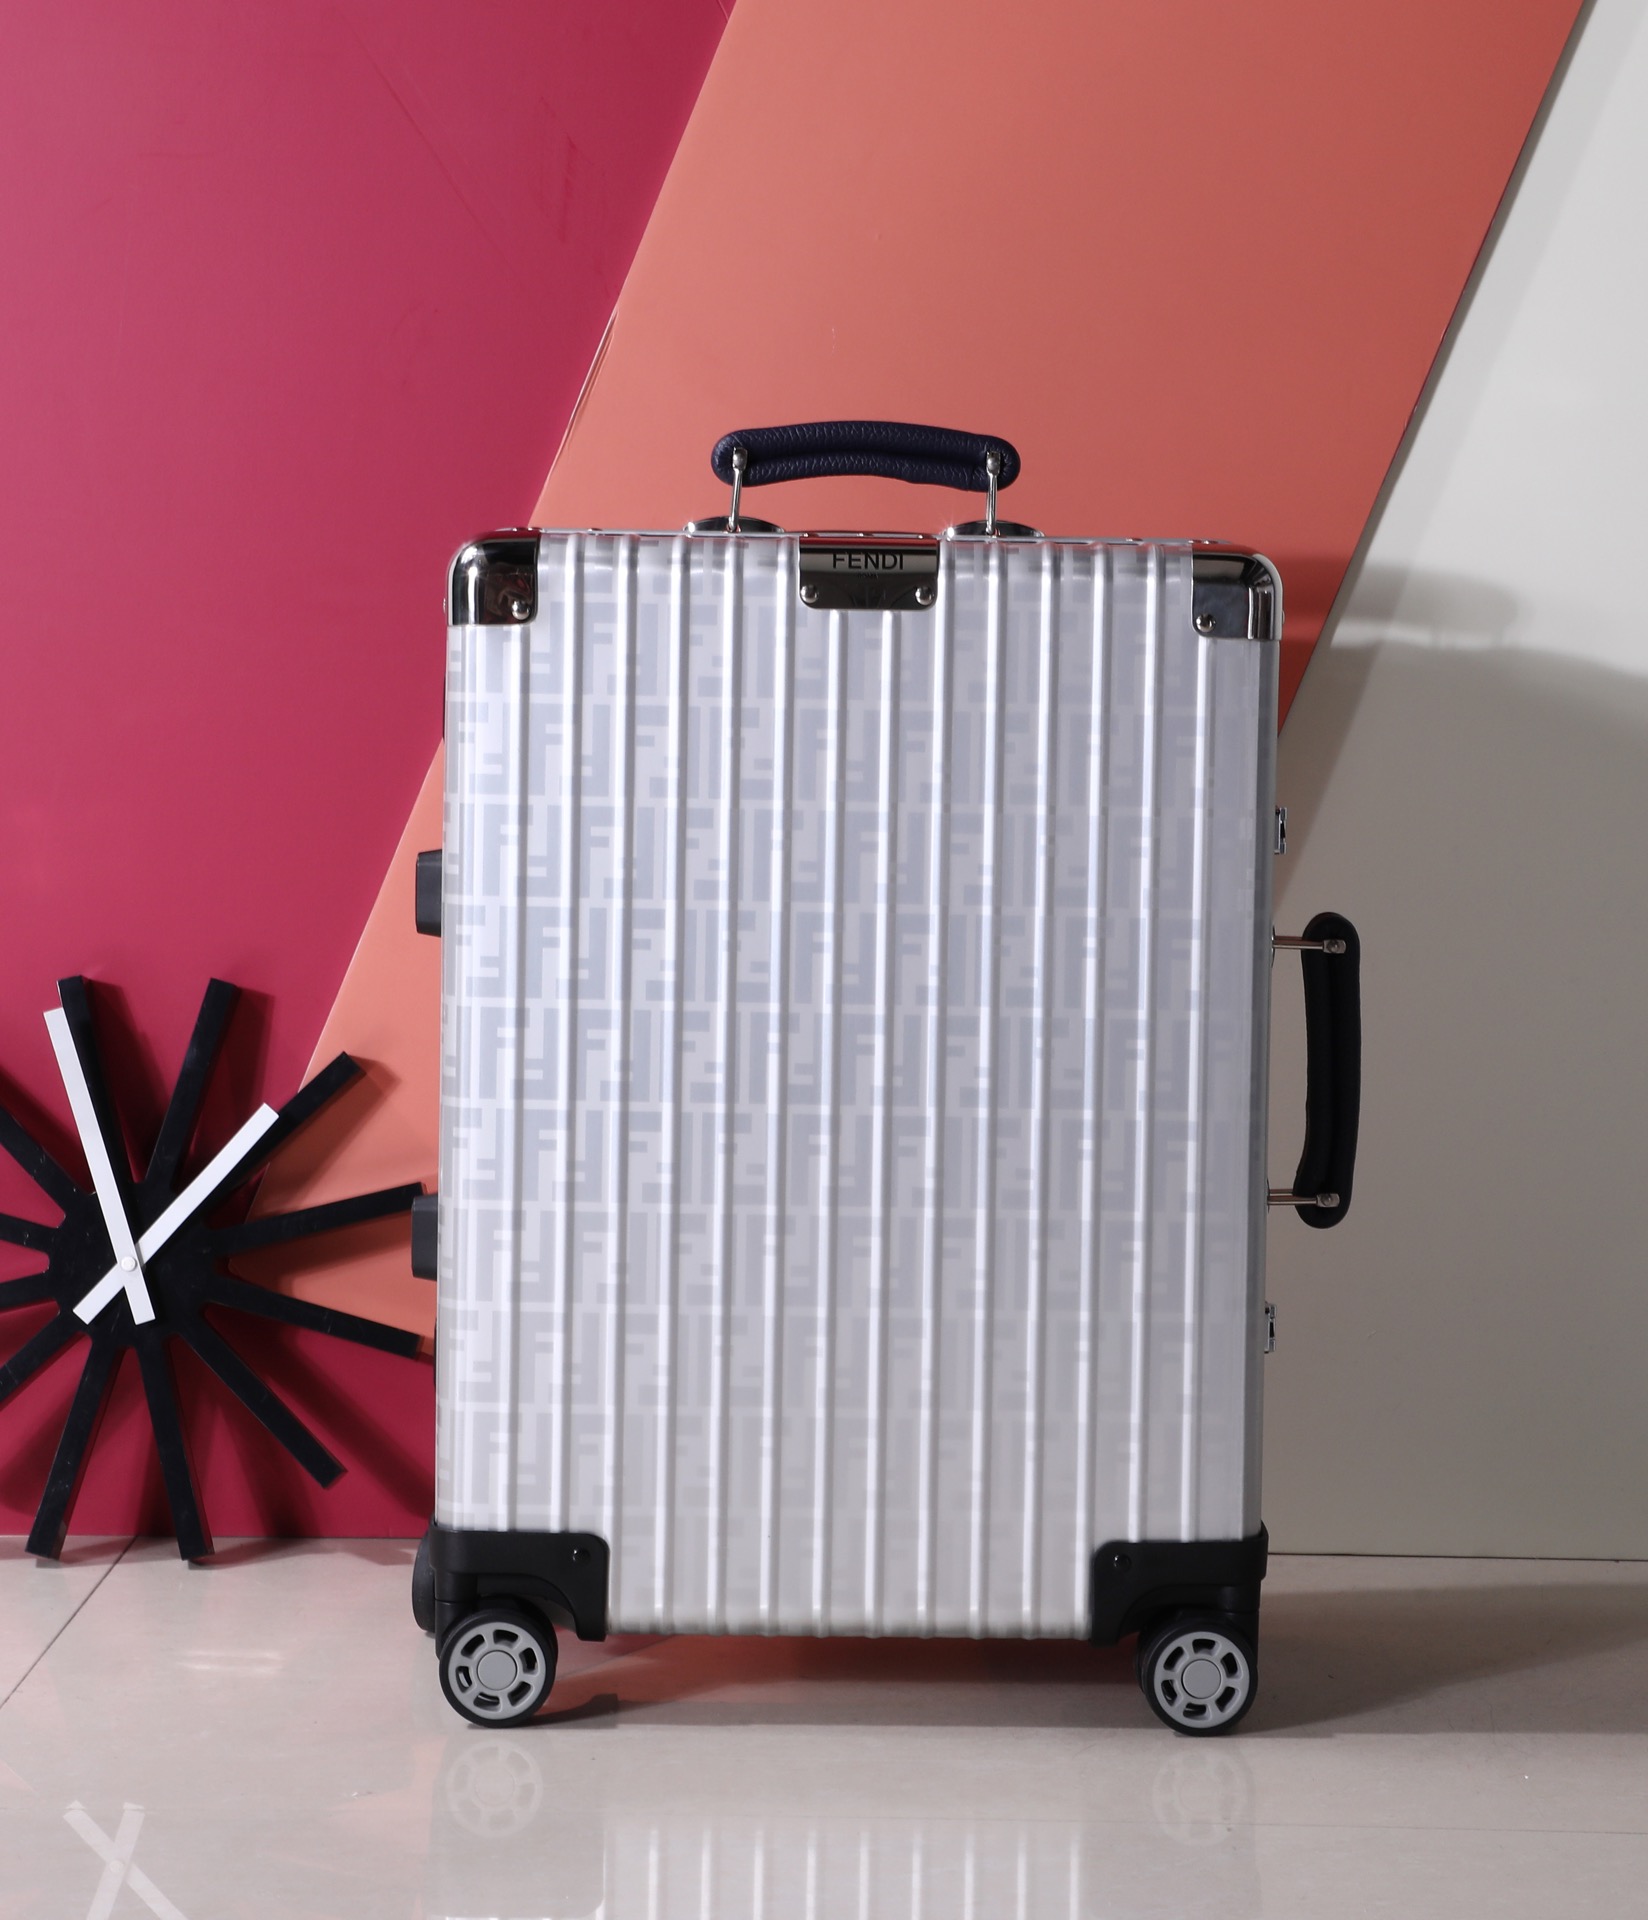 Fendi teamed up with Rimowo to launch a limited luggage case